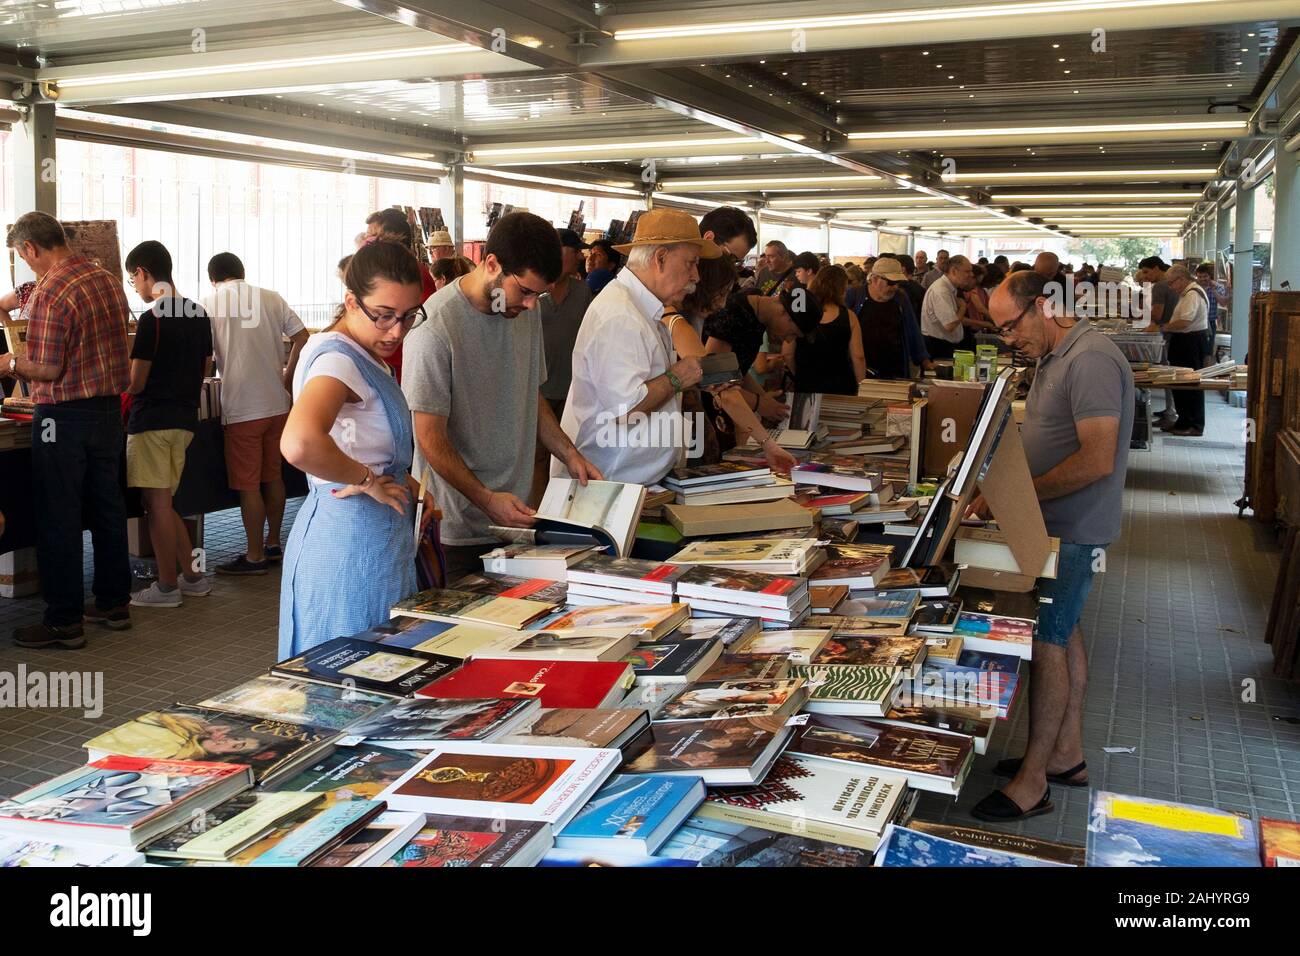 BARCELONA, SPAIN - JULY 15, 2018: Customers at the stalls of the secondhand book market at the Mercat de Sant Antoni public market in Barcelona, Spain Stock Photo